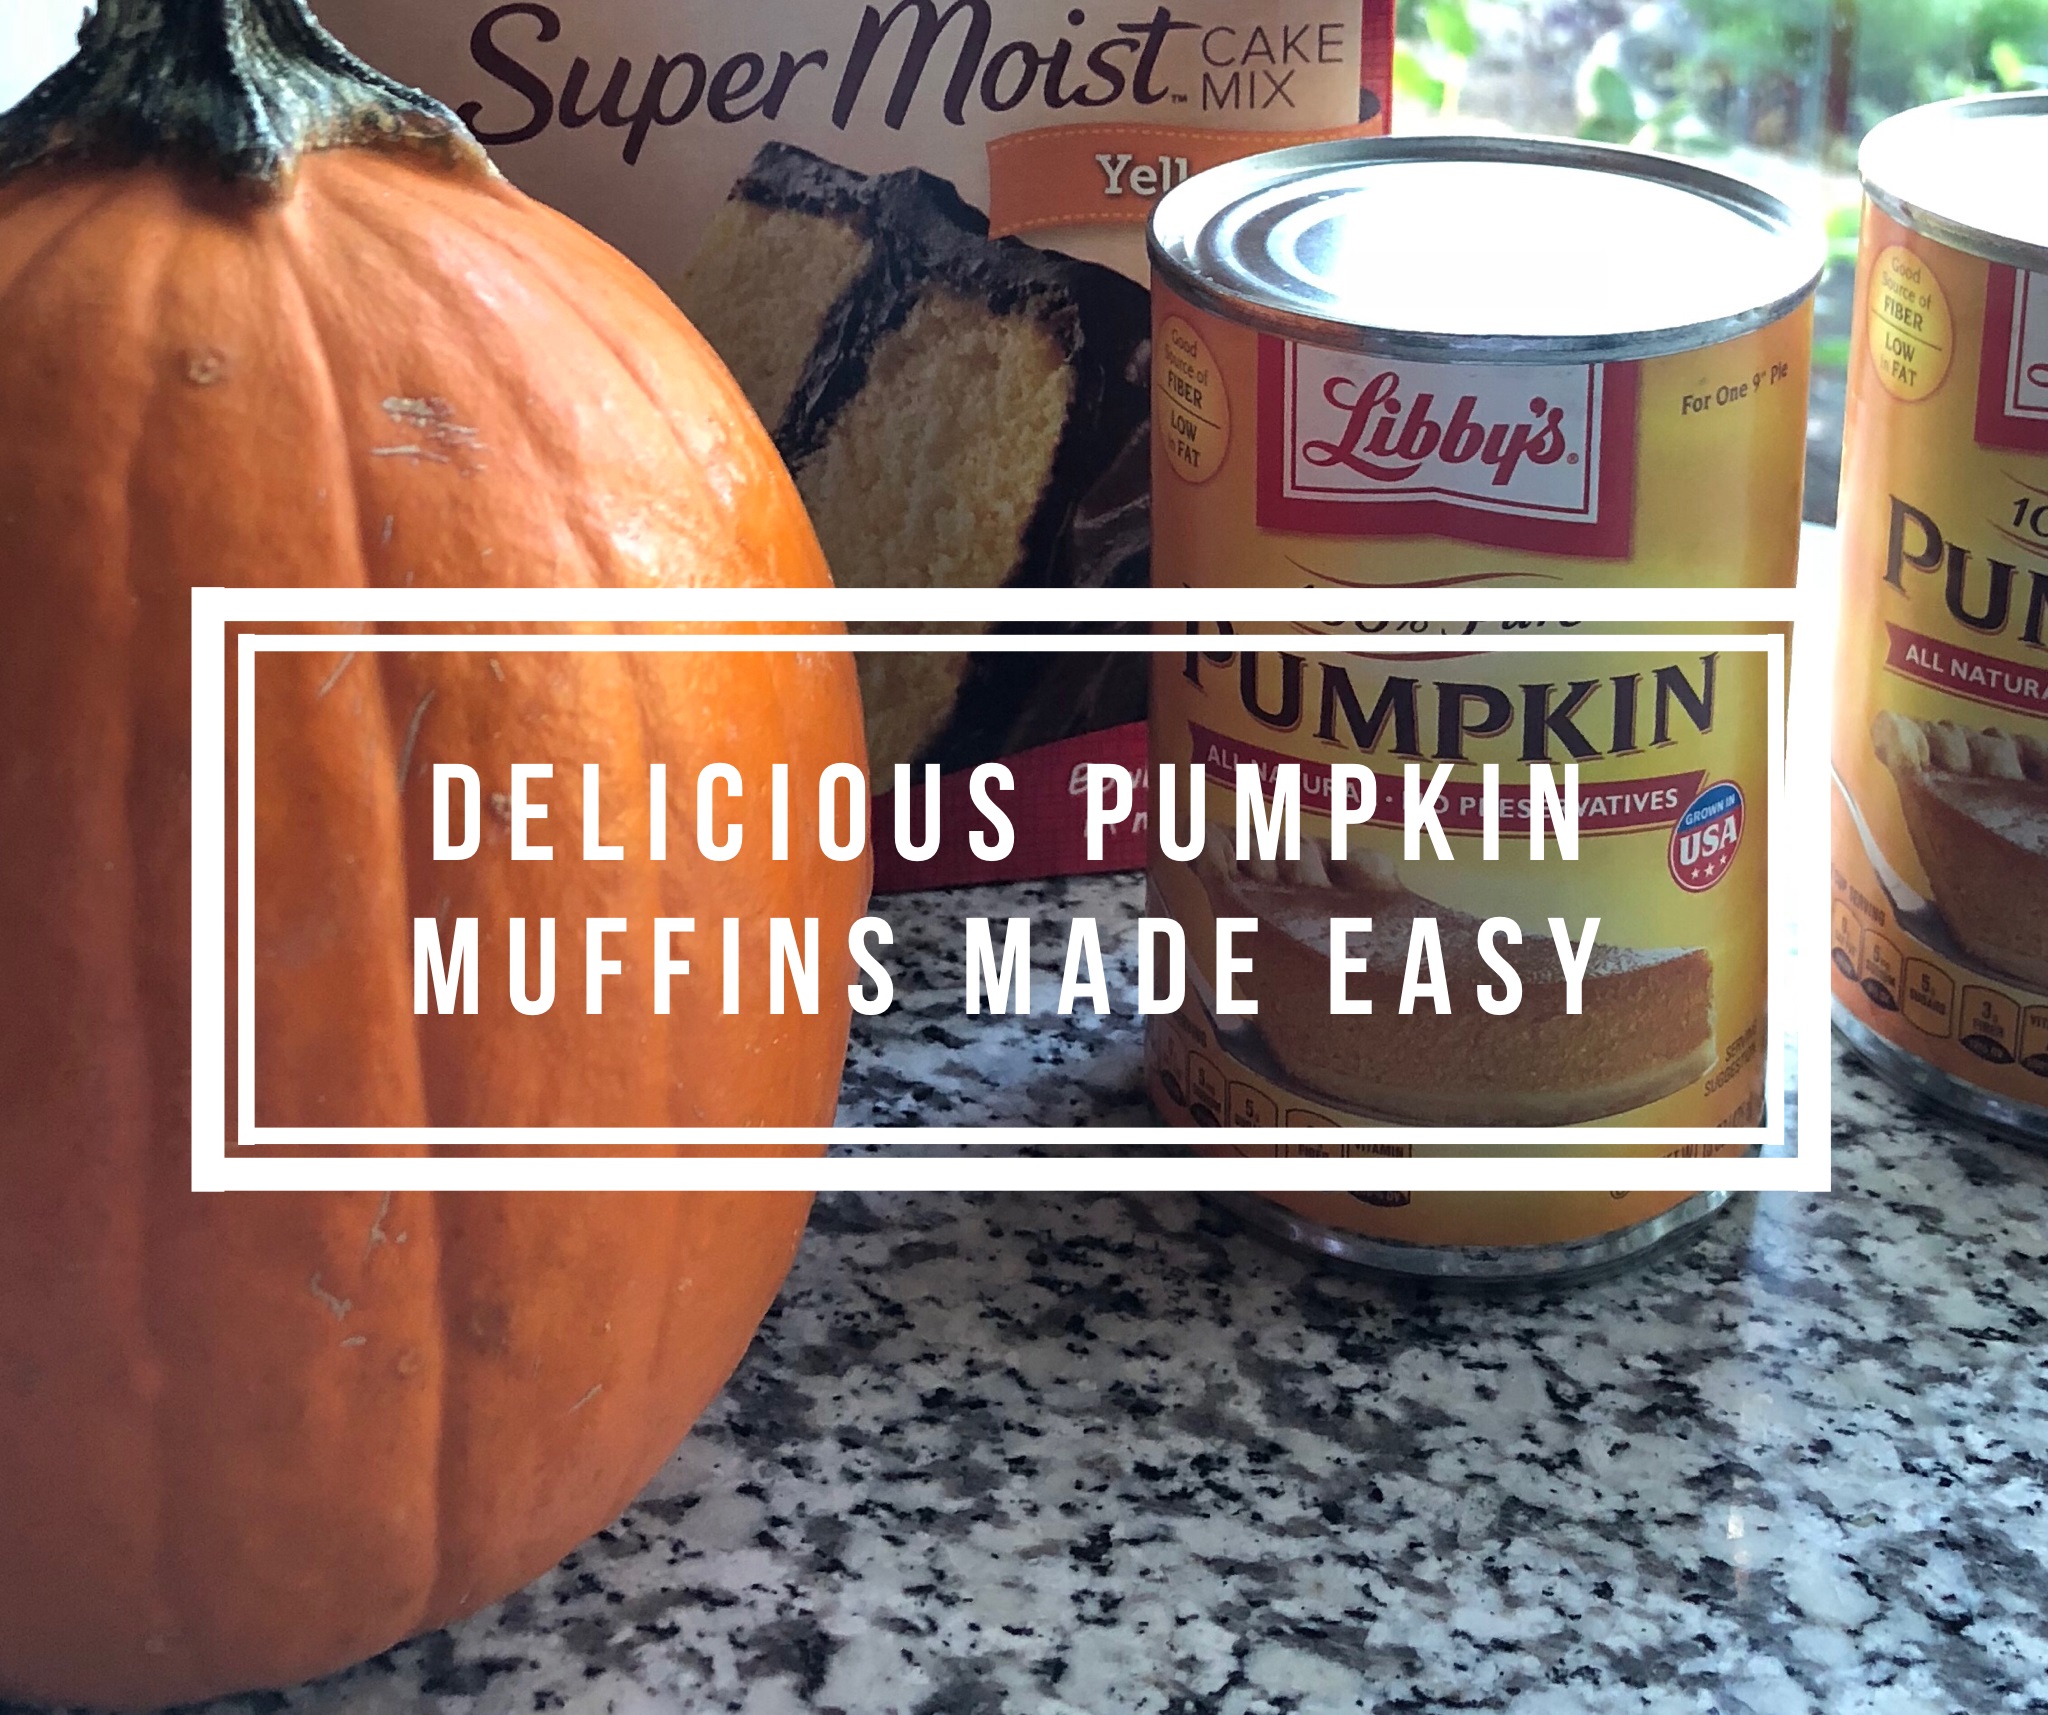 Delicious Pumpkin Muffins Made Easy